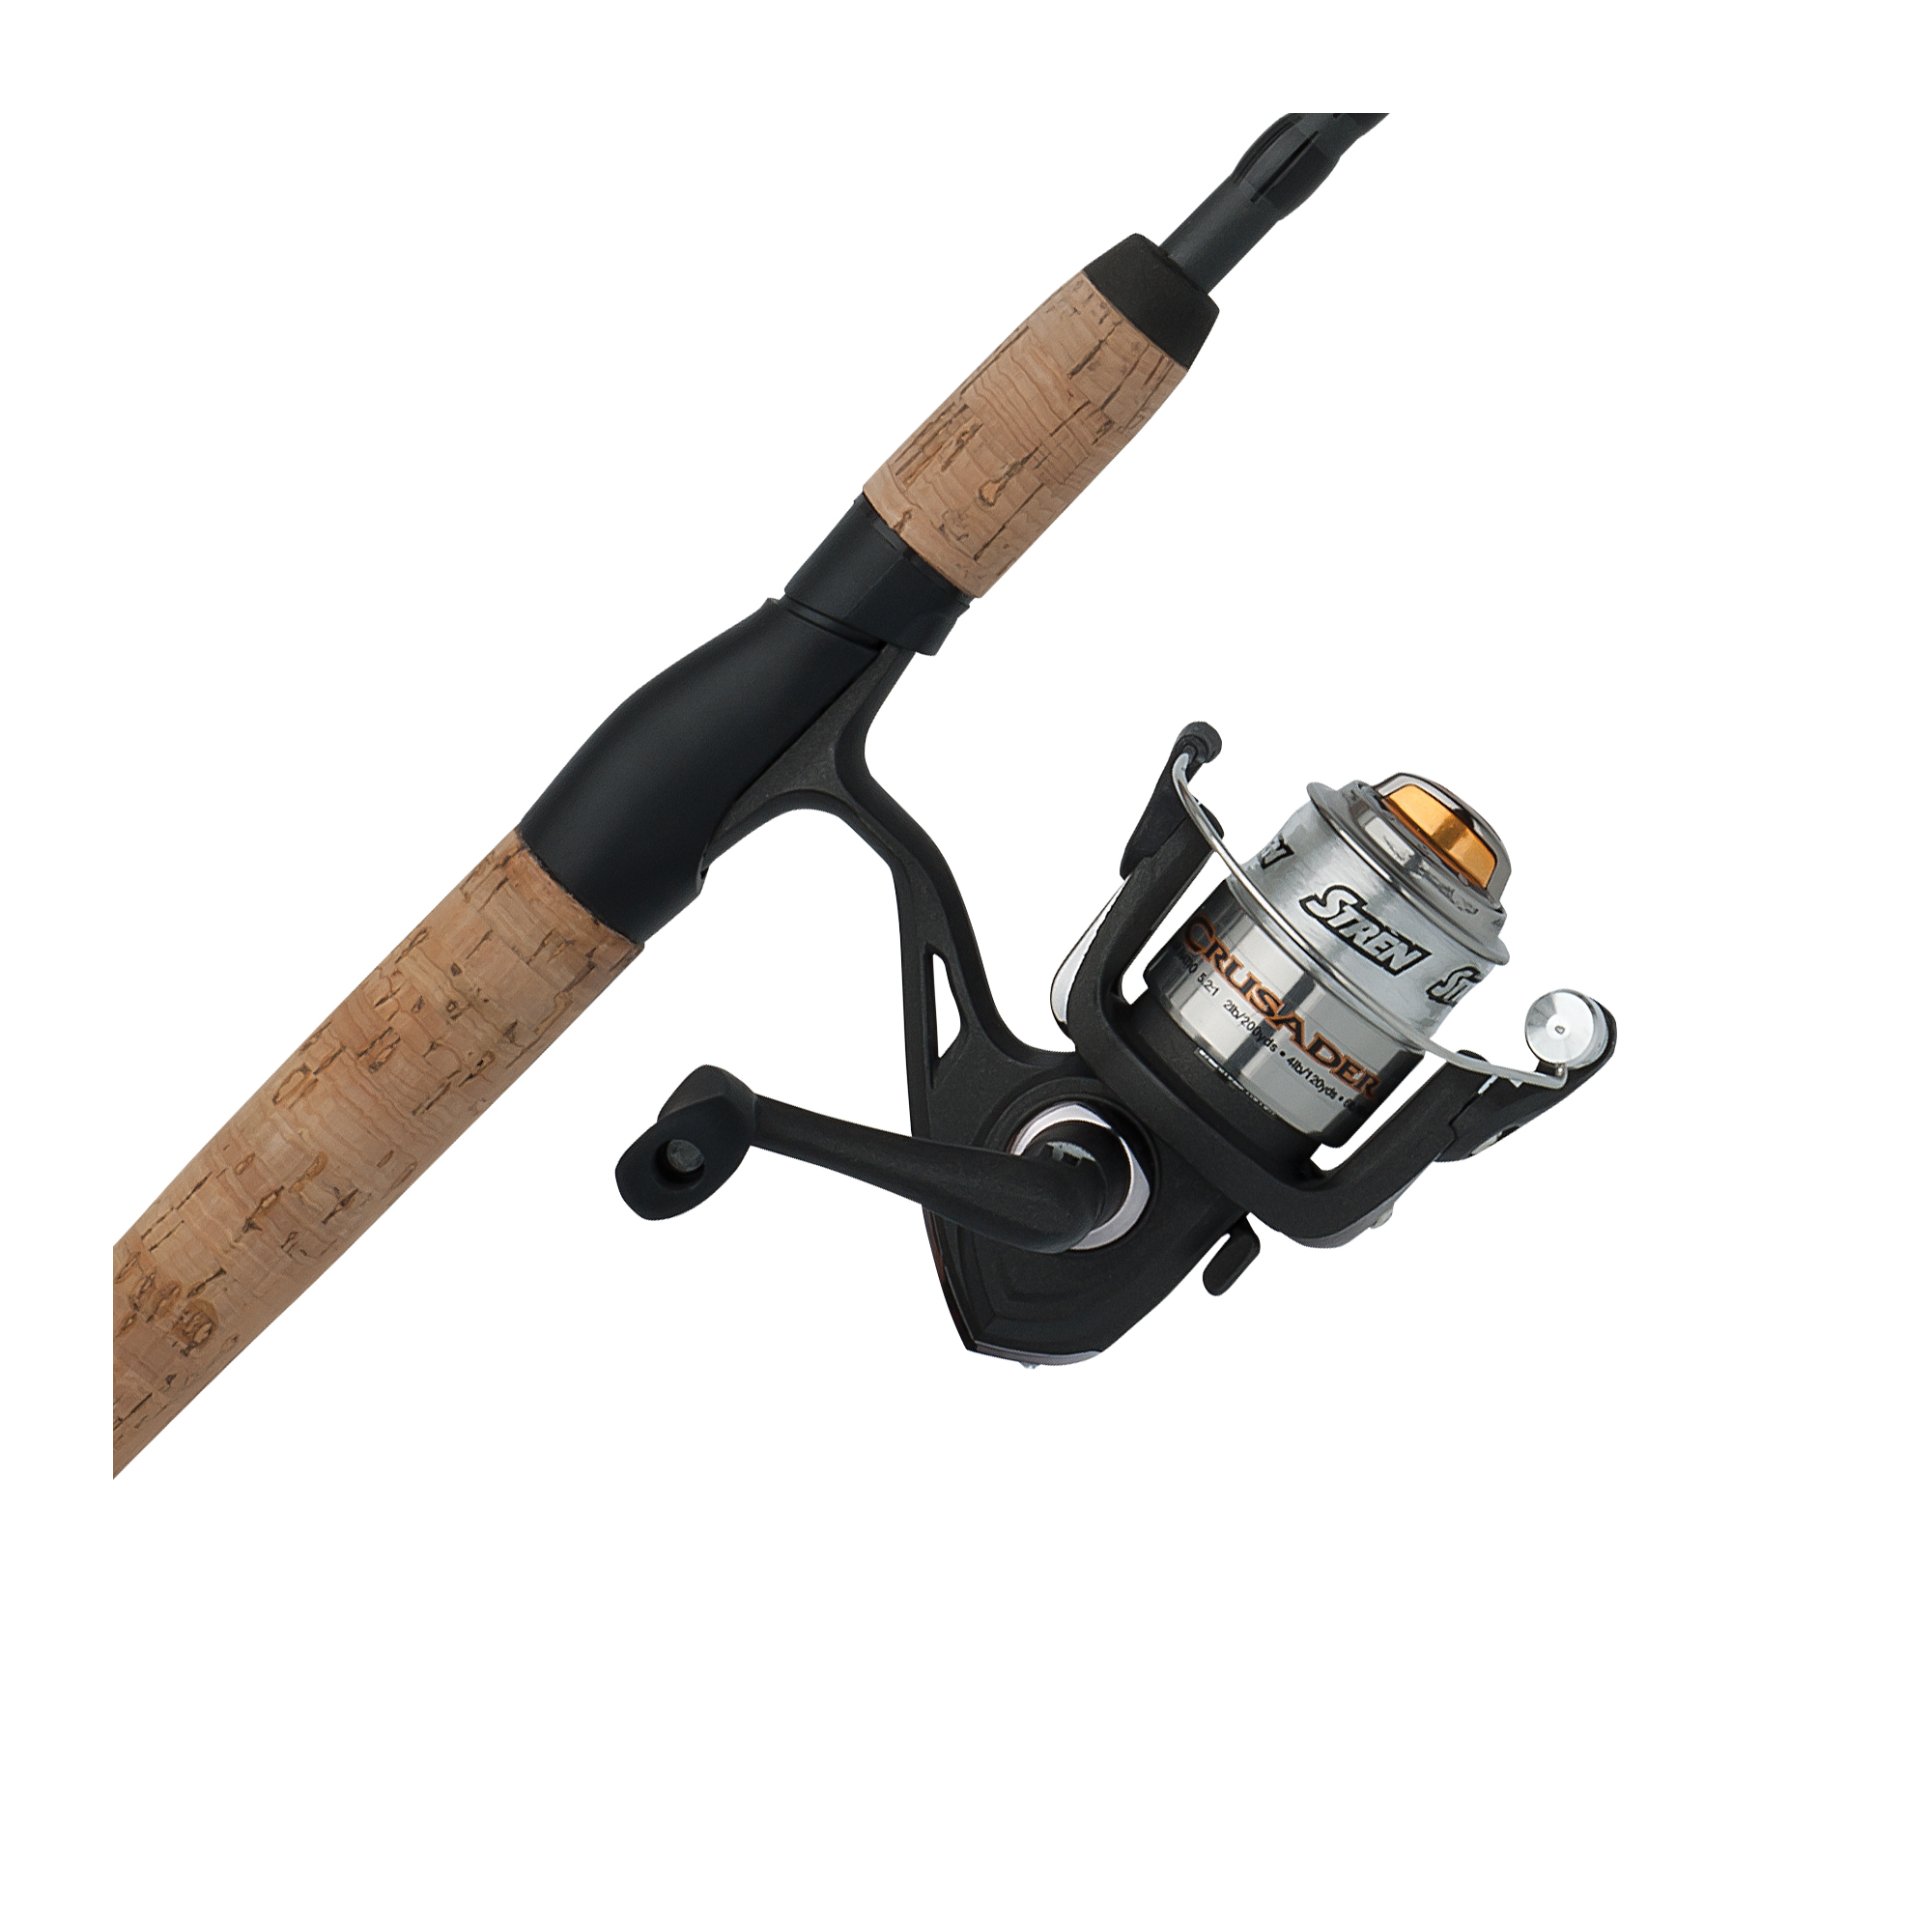 Shakespeare Crusader Spinning Rod and Reel Combo - image 1 of 2